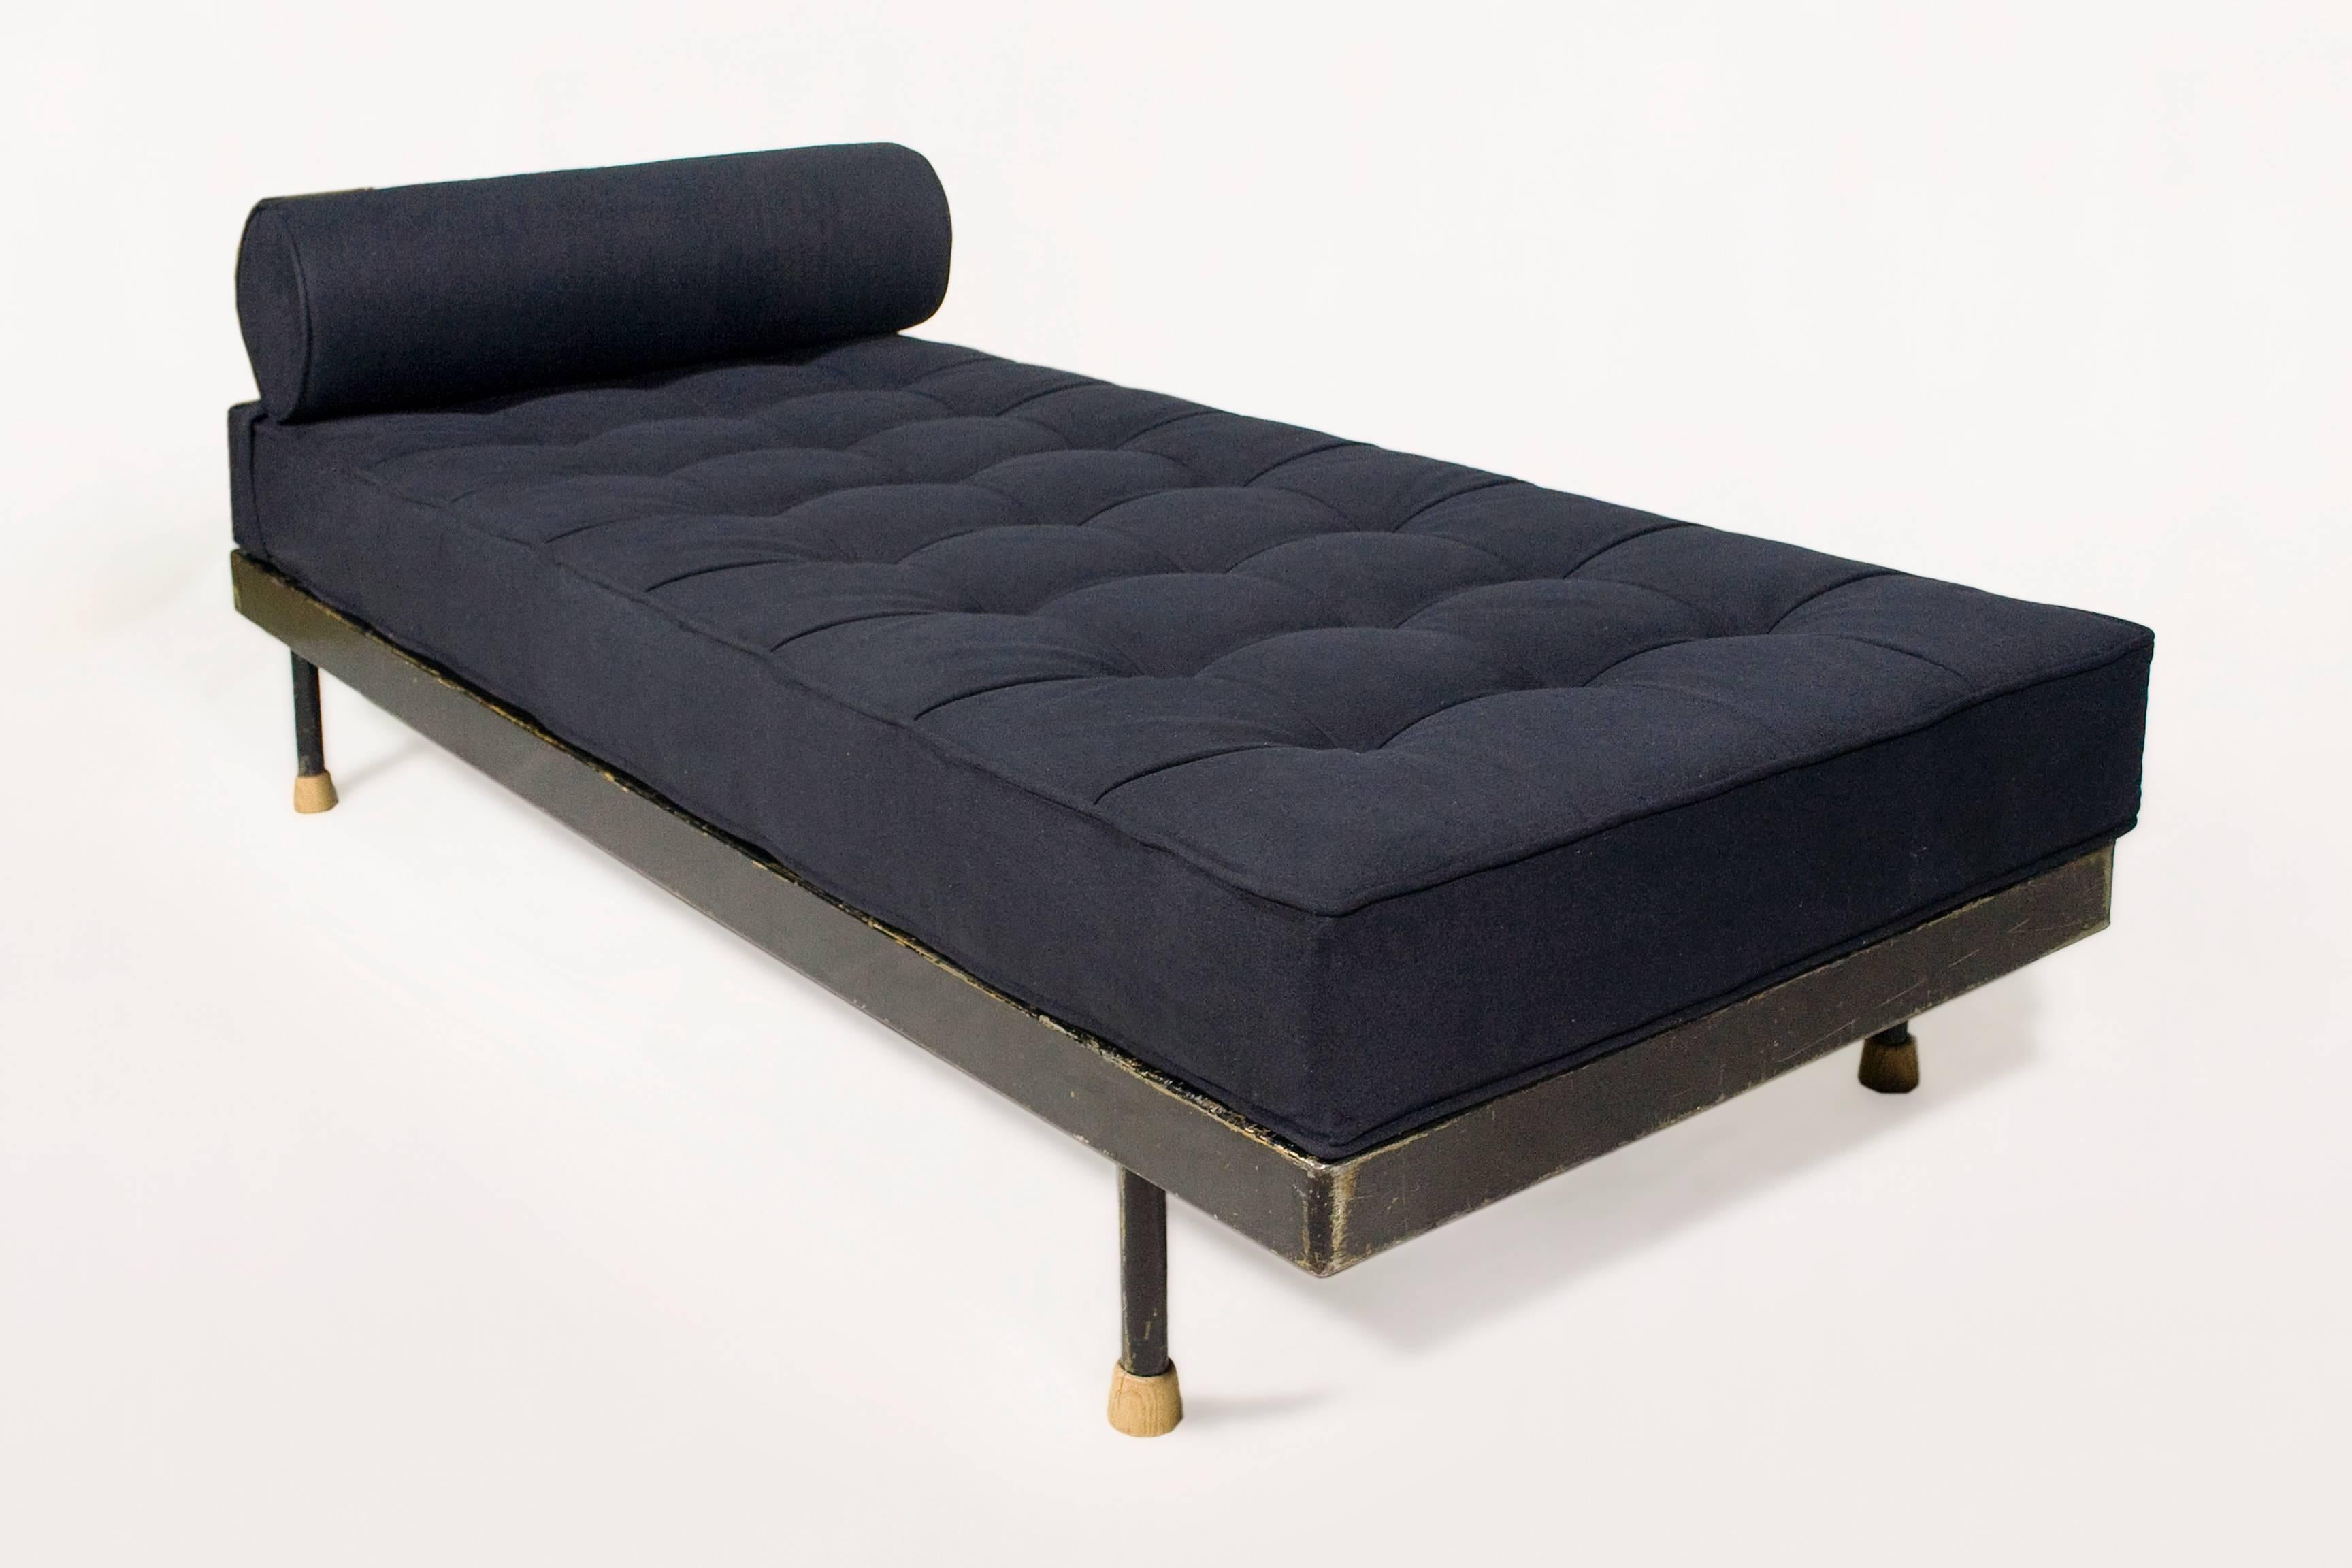 Jean Prouvé SCAL nº 450 daybed.
Bent sheet steel, steel tube and wood.
France, circa 1950.
New Mattress and Upholstery.
Documentation: Renée Diamant, Lits isolés ou jumelés , dans L’Architecture d’Aujourd’hui , sept-oct 1954, p.36.
Good